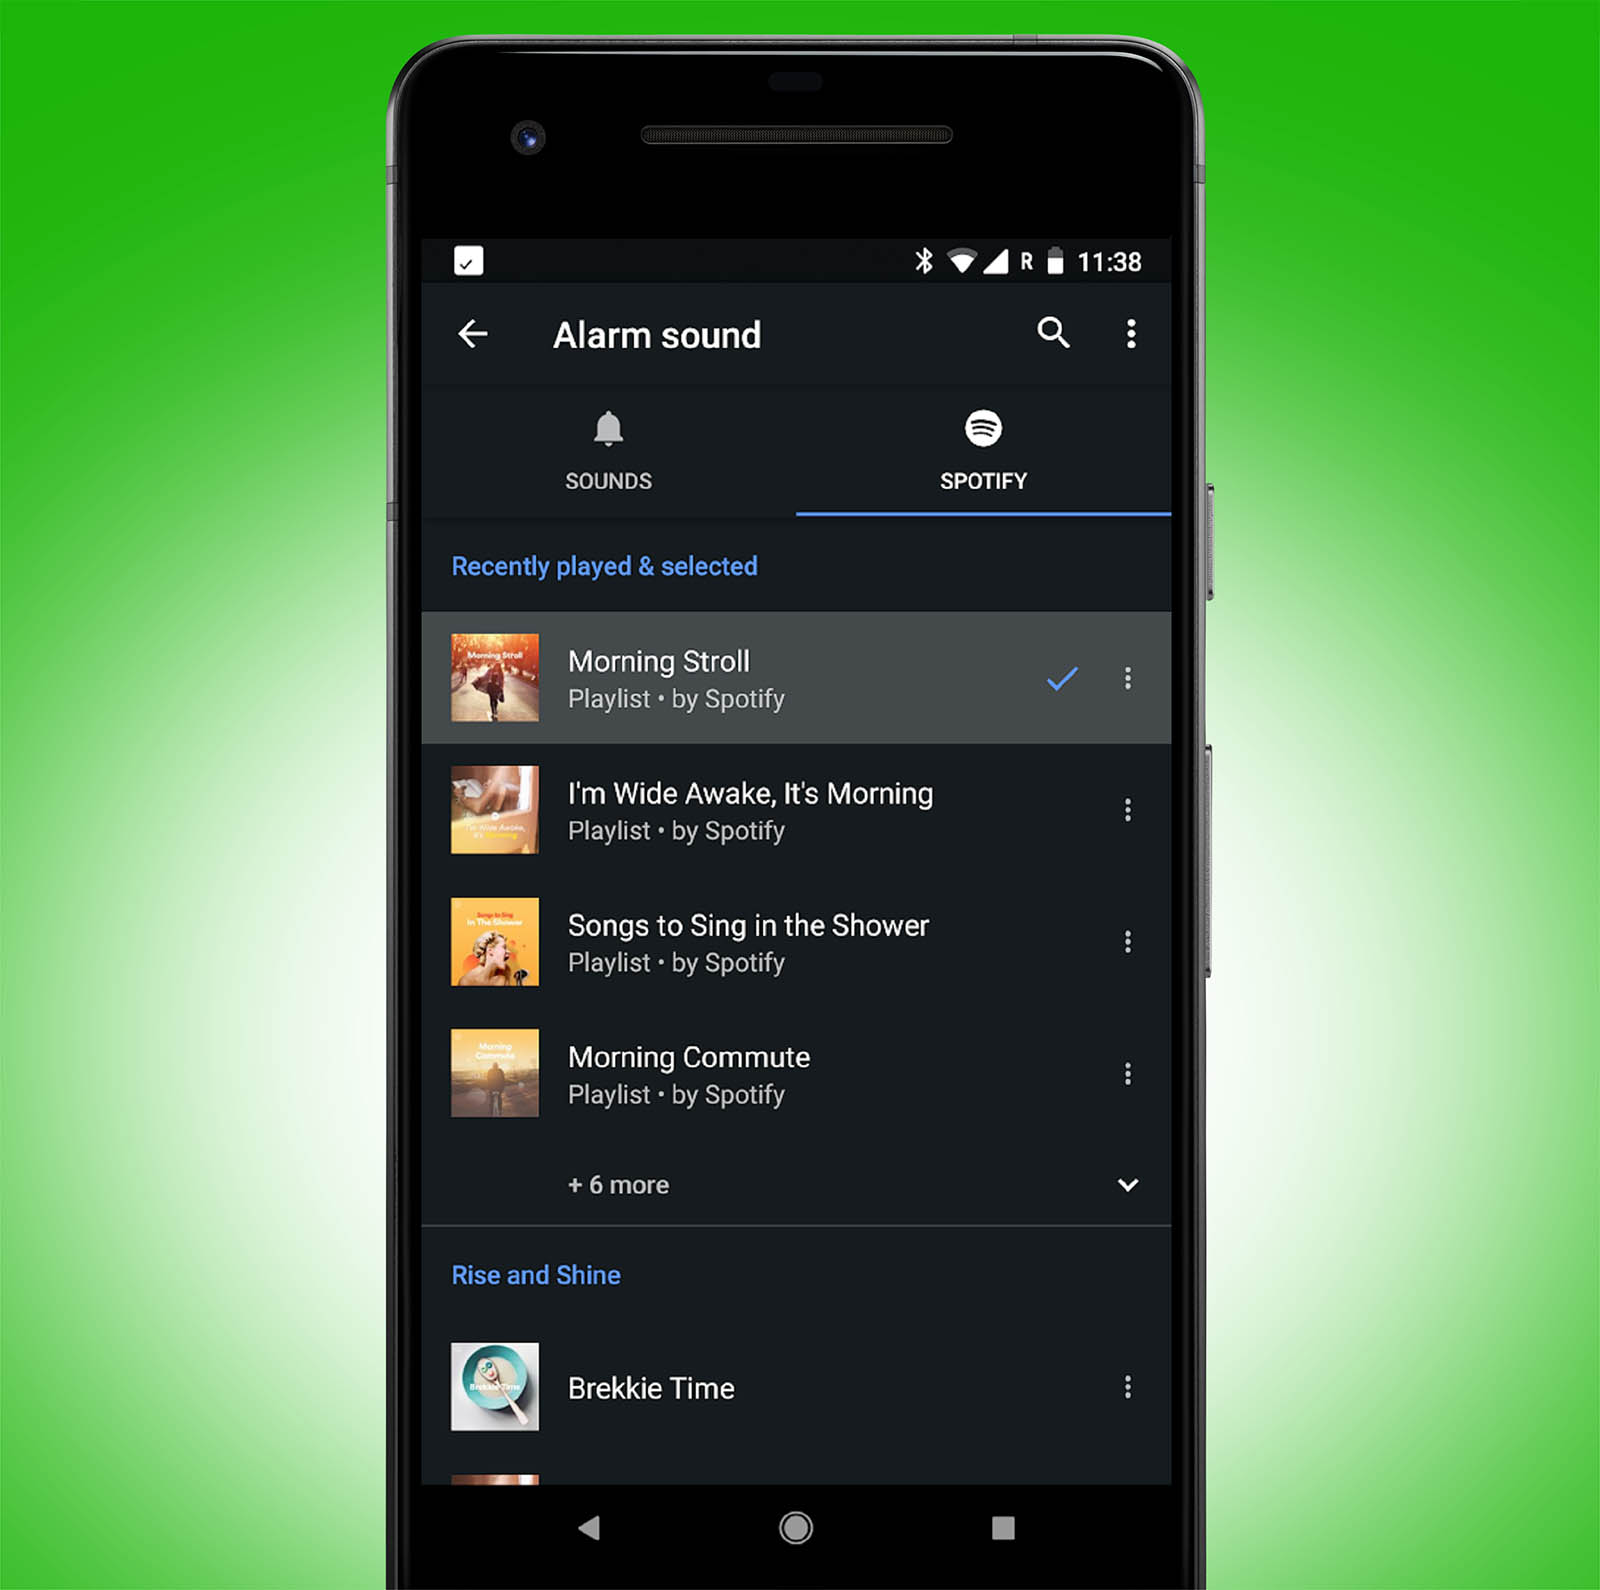 Wake up to the perfect soundtrack with Spotify and Clock app from Google